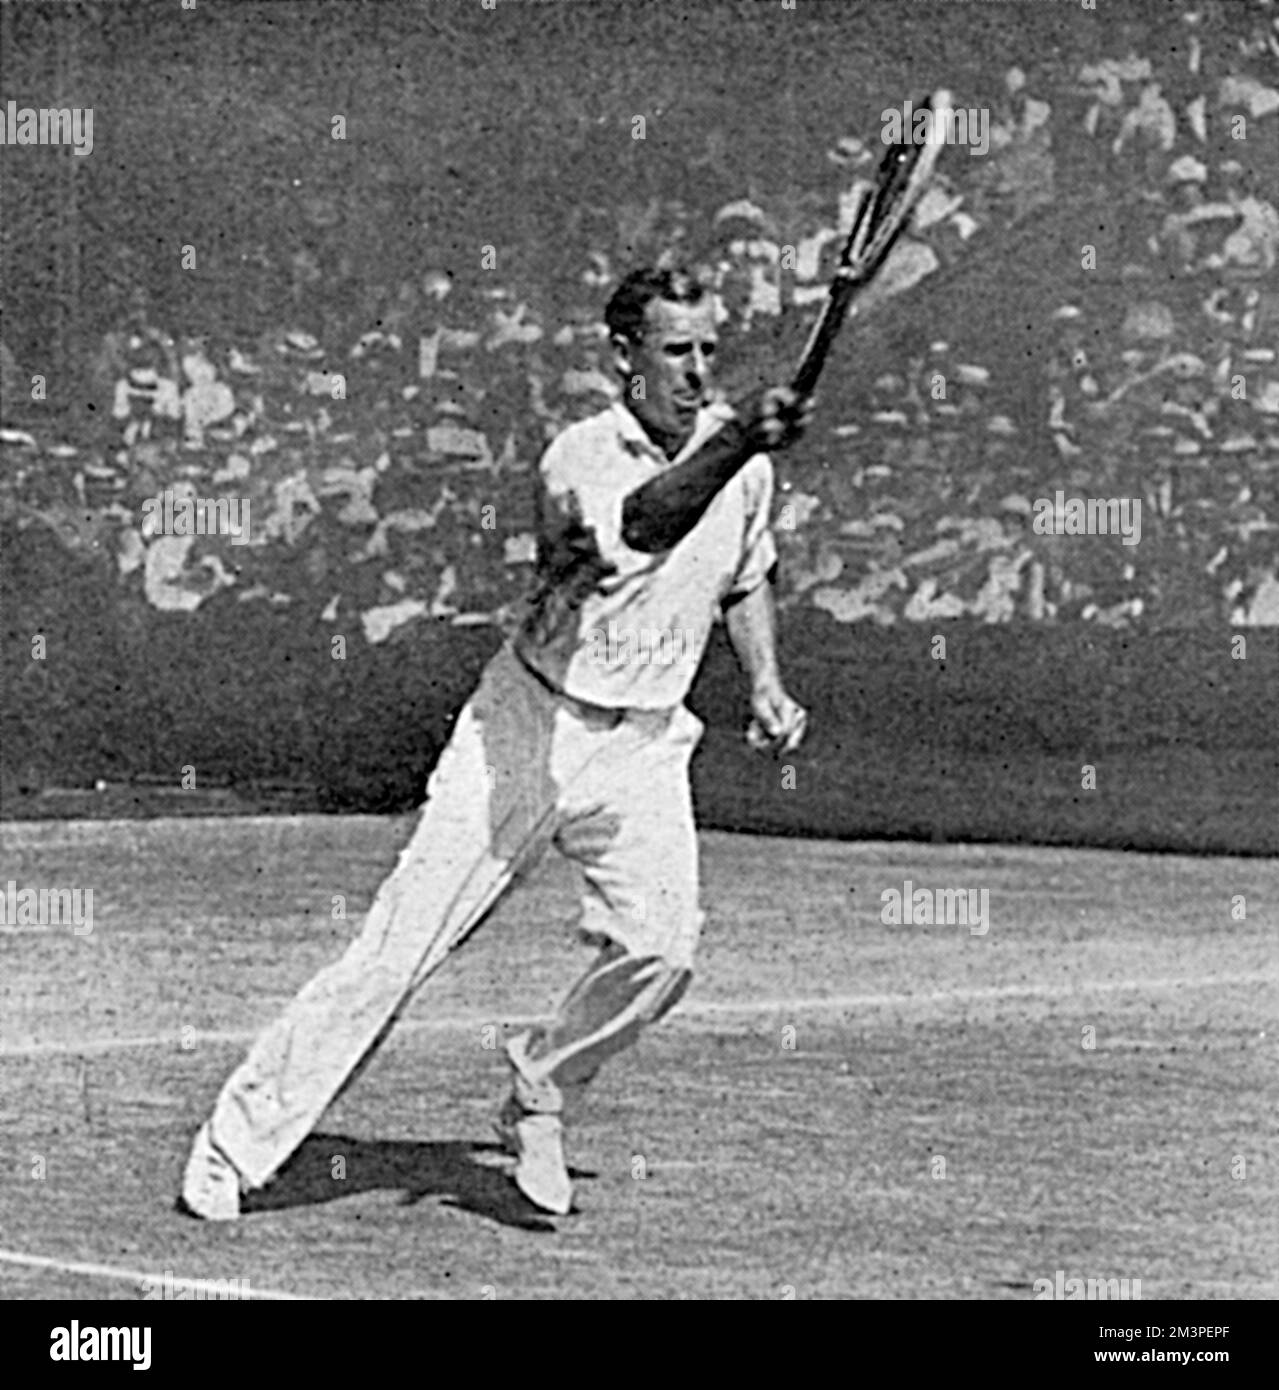 Anthony Frederick Wilding (1883 - 1915), shown in action in the men's final at the 1914 Wimbledon tennis championship against Norman Brookes.  Wilding had won Wimbledon in four consecutive years but was beaten by Norman Brookes that year.  He was killed in May 1915 at the Battle of Aubers Ridge.     Date: 1914 Stock Photo